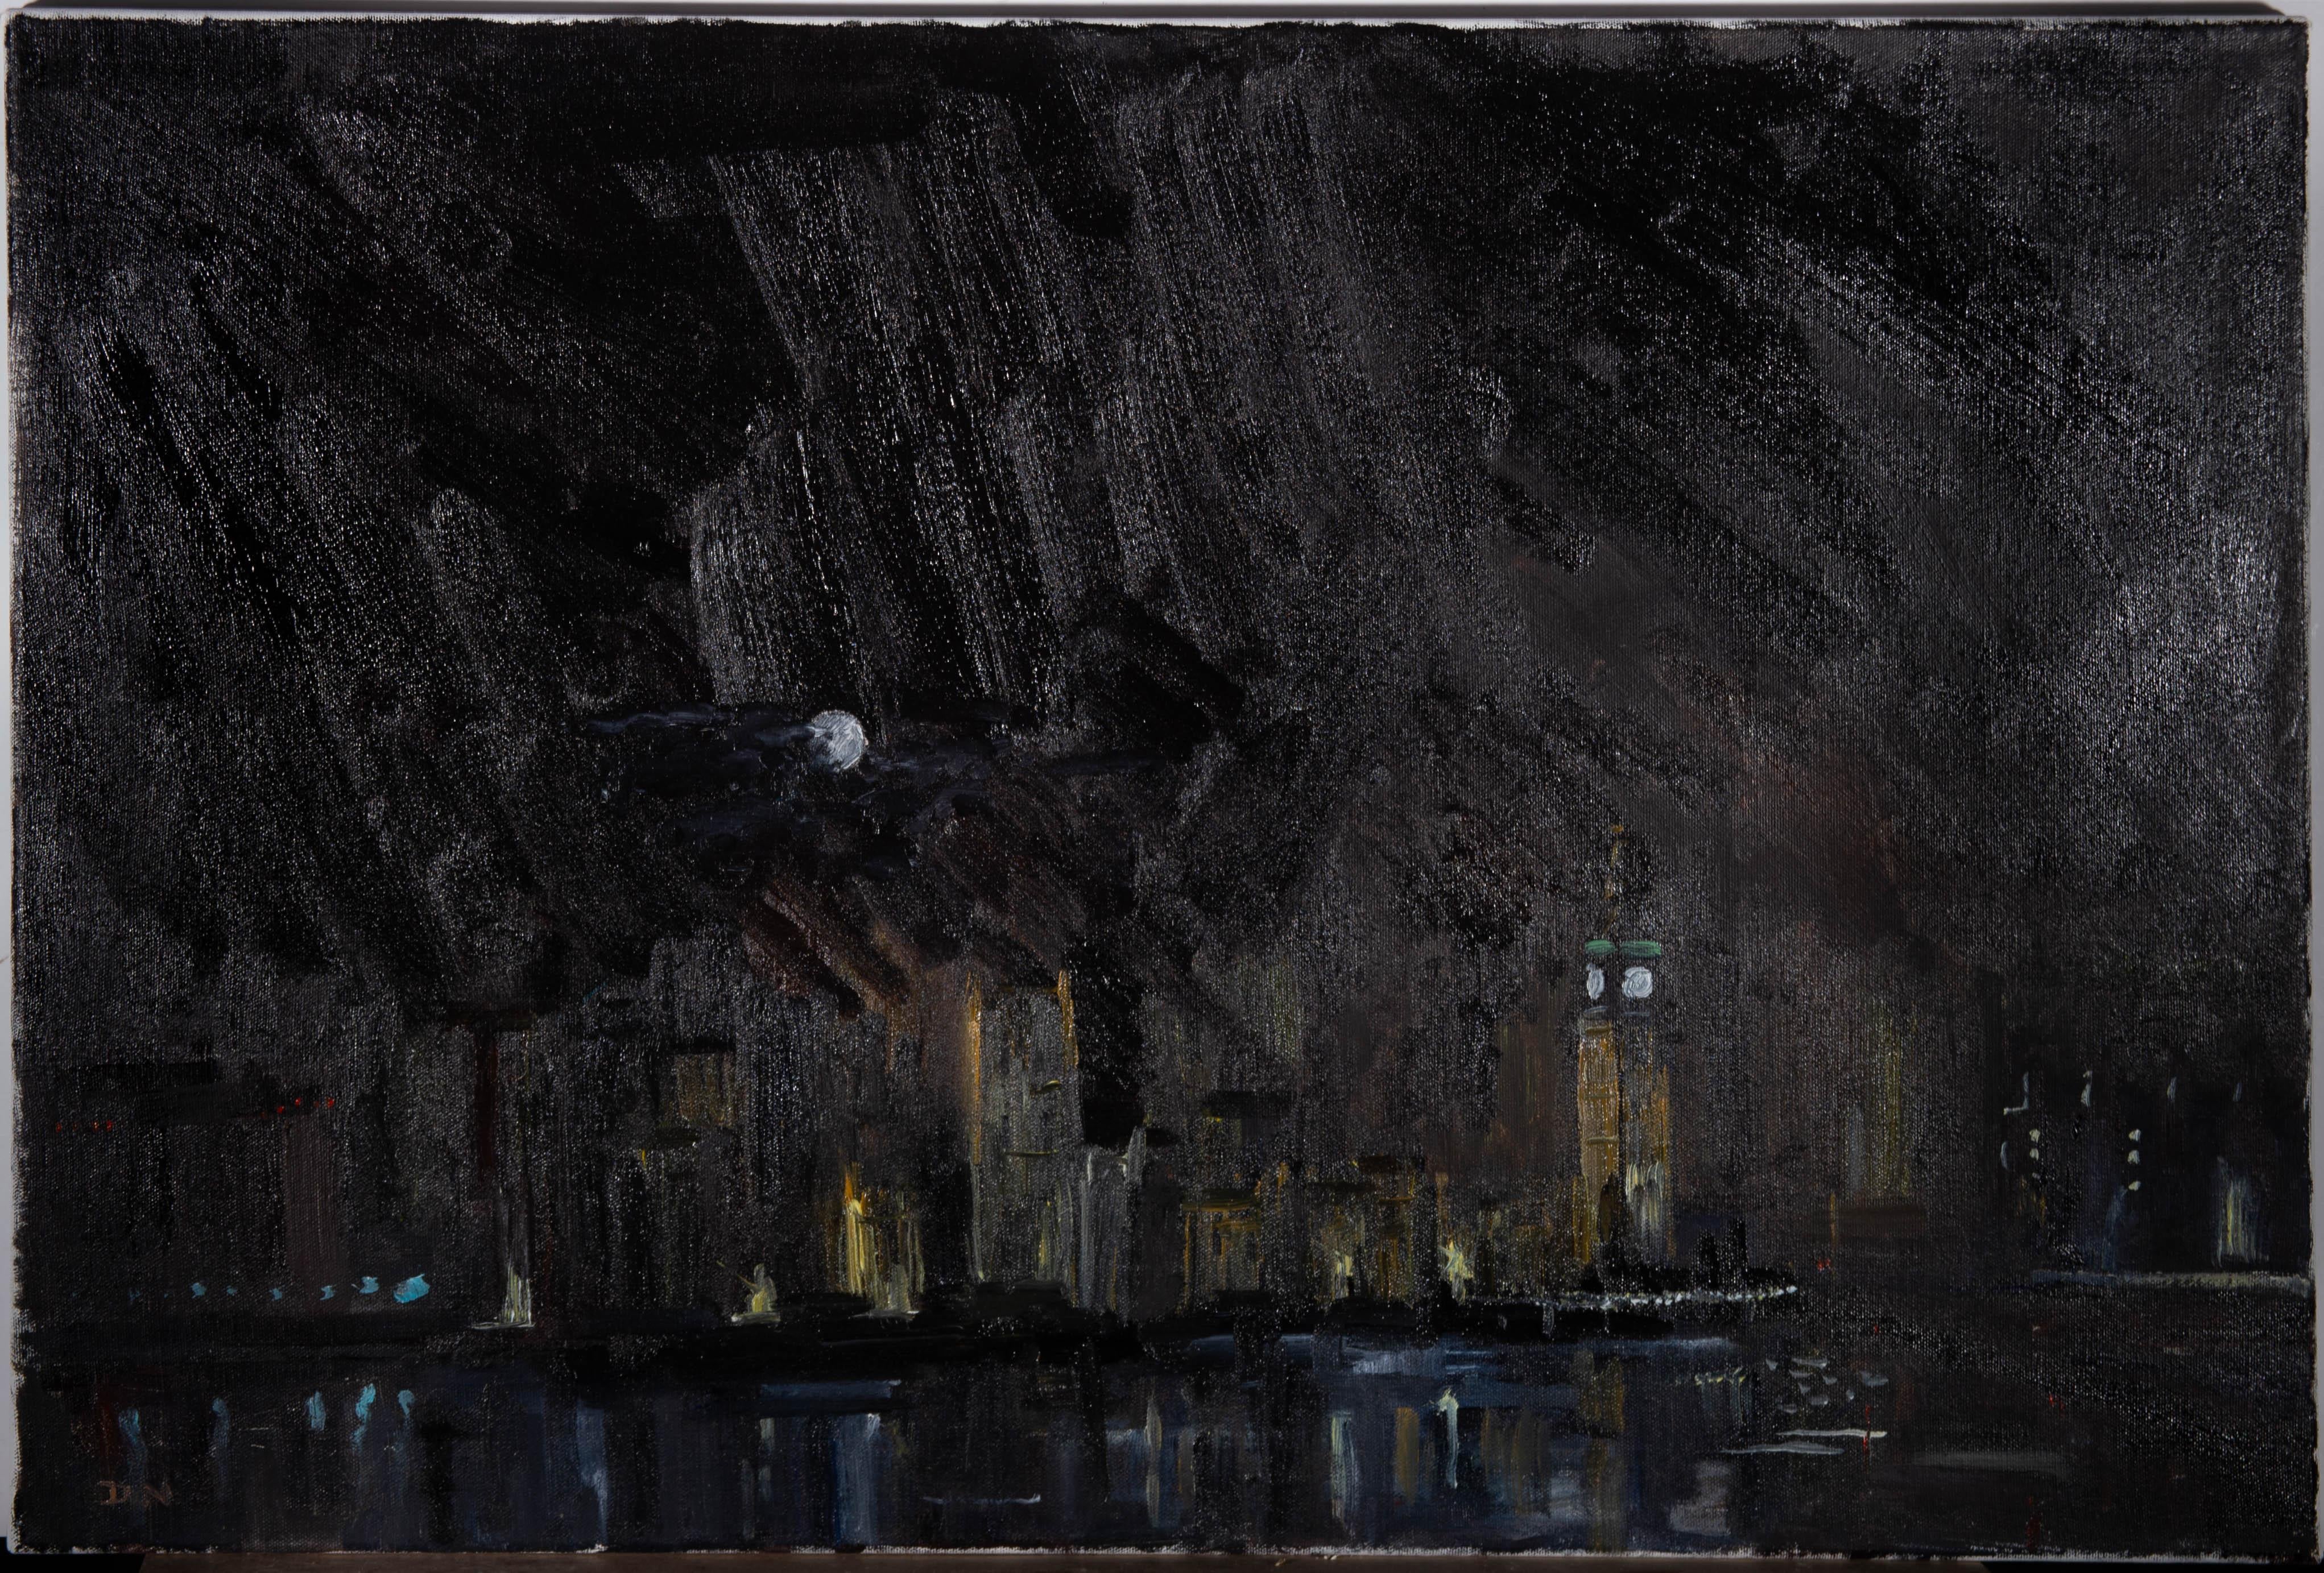 A striking moonlit view of the London embankment with the Houses of Parliament and Big Ben Lit up. The artist has initialed at the lower left. On canvas.
